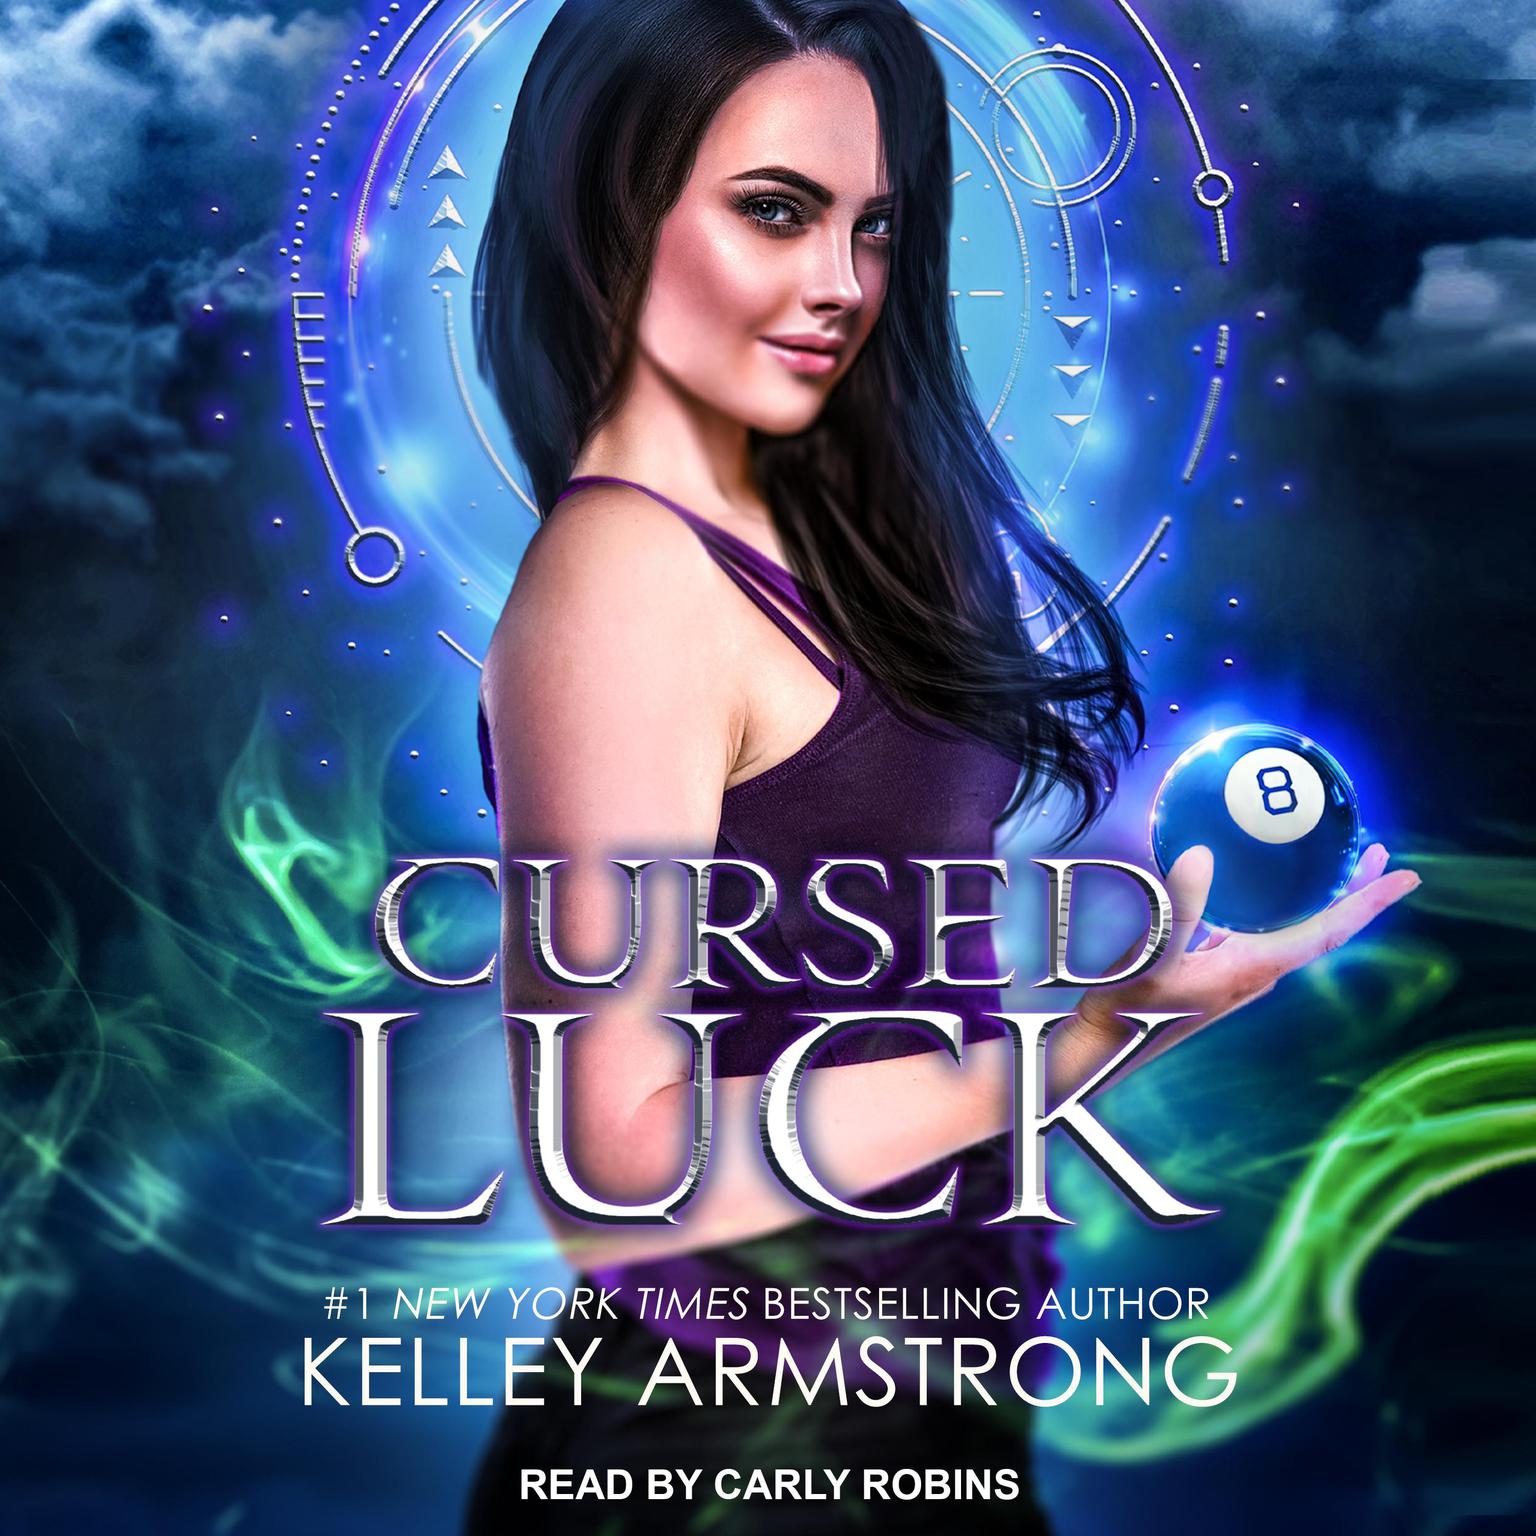 Cursed Luck Audiobook, by Kelley Armstrong